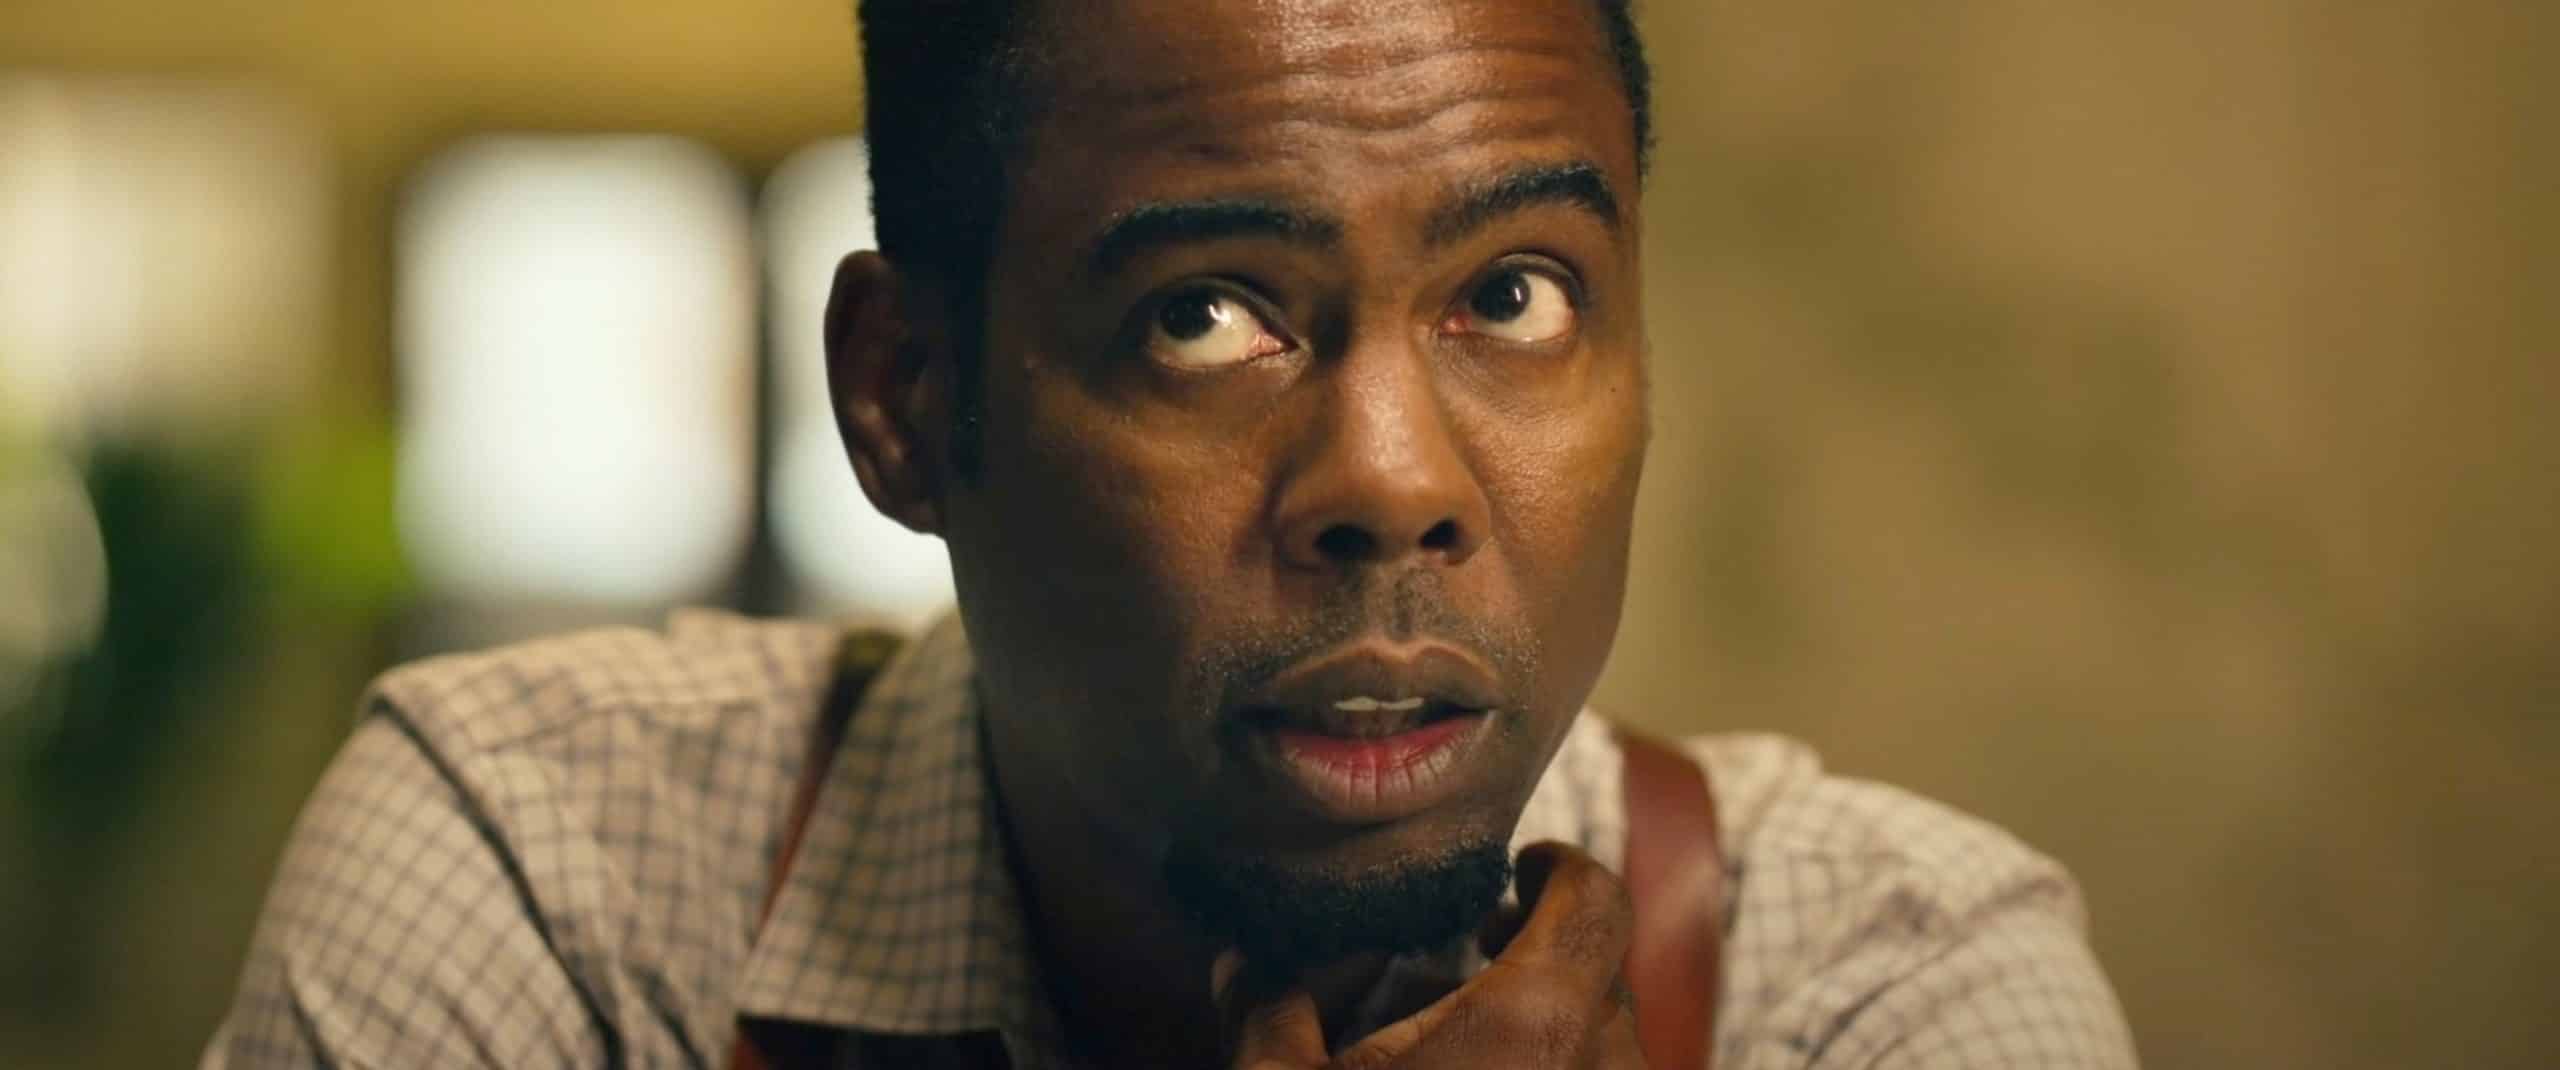 SPIRAL, (aka SPIRAL: FROM THE BOOK OF SAW), Chris Rock, 2021